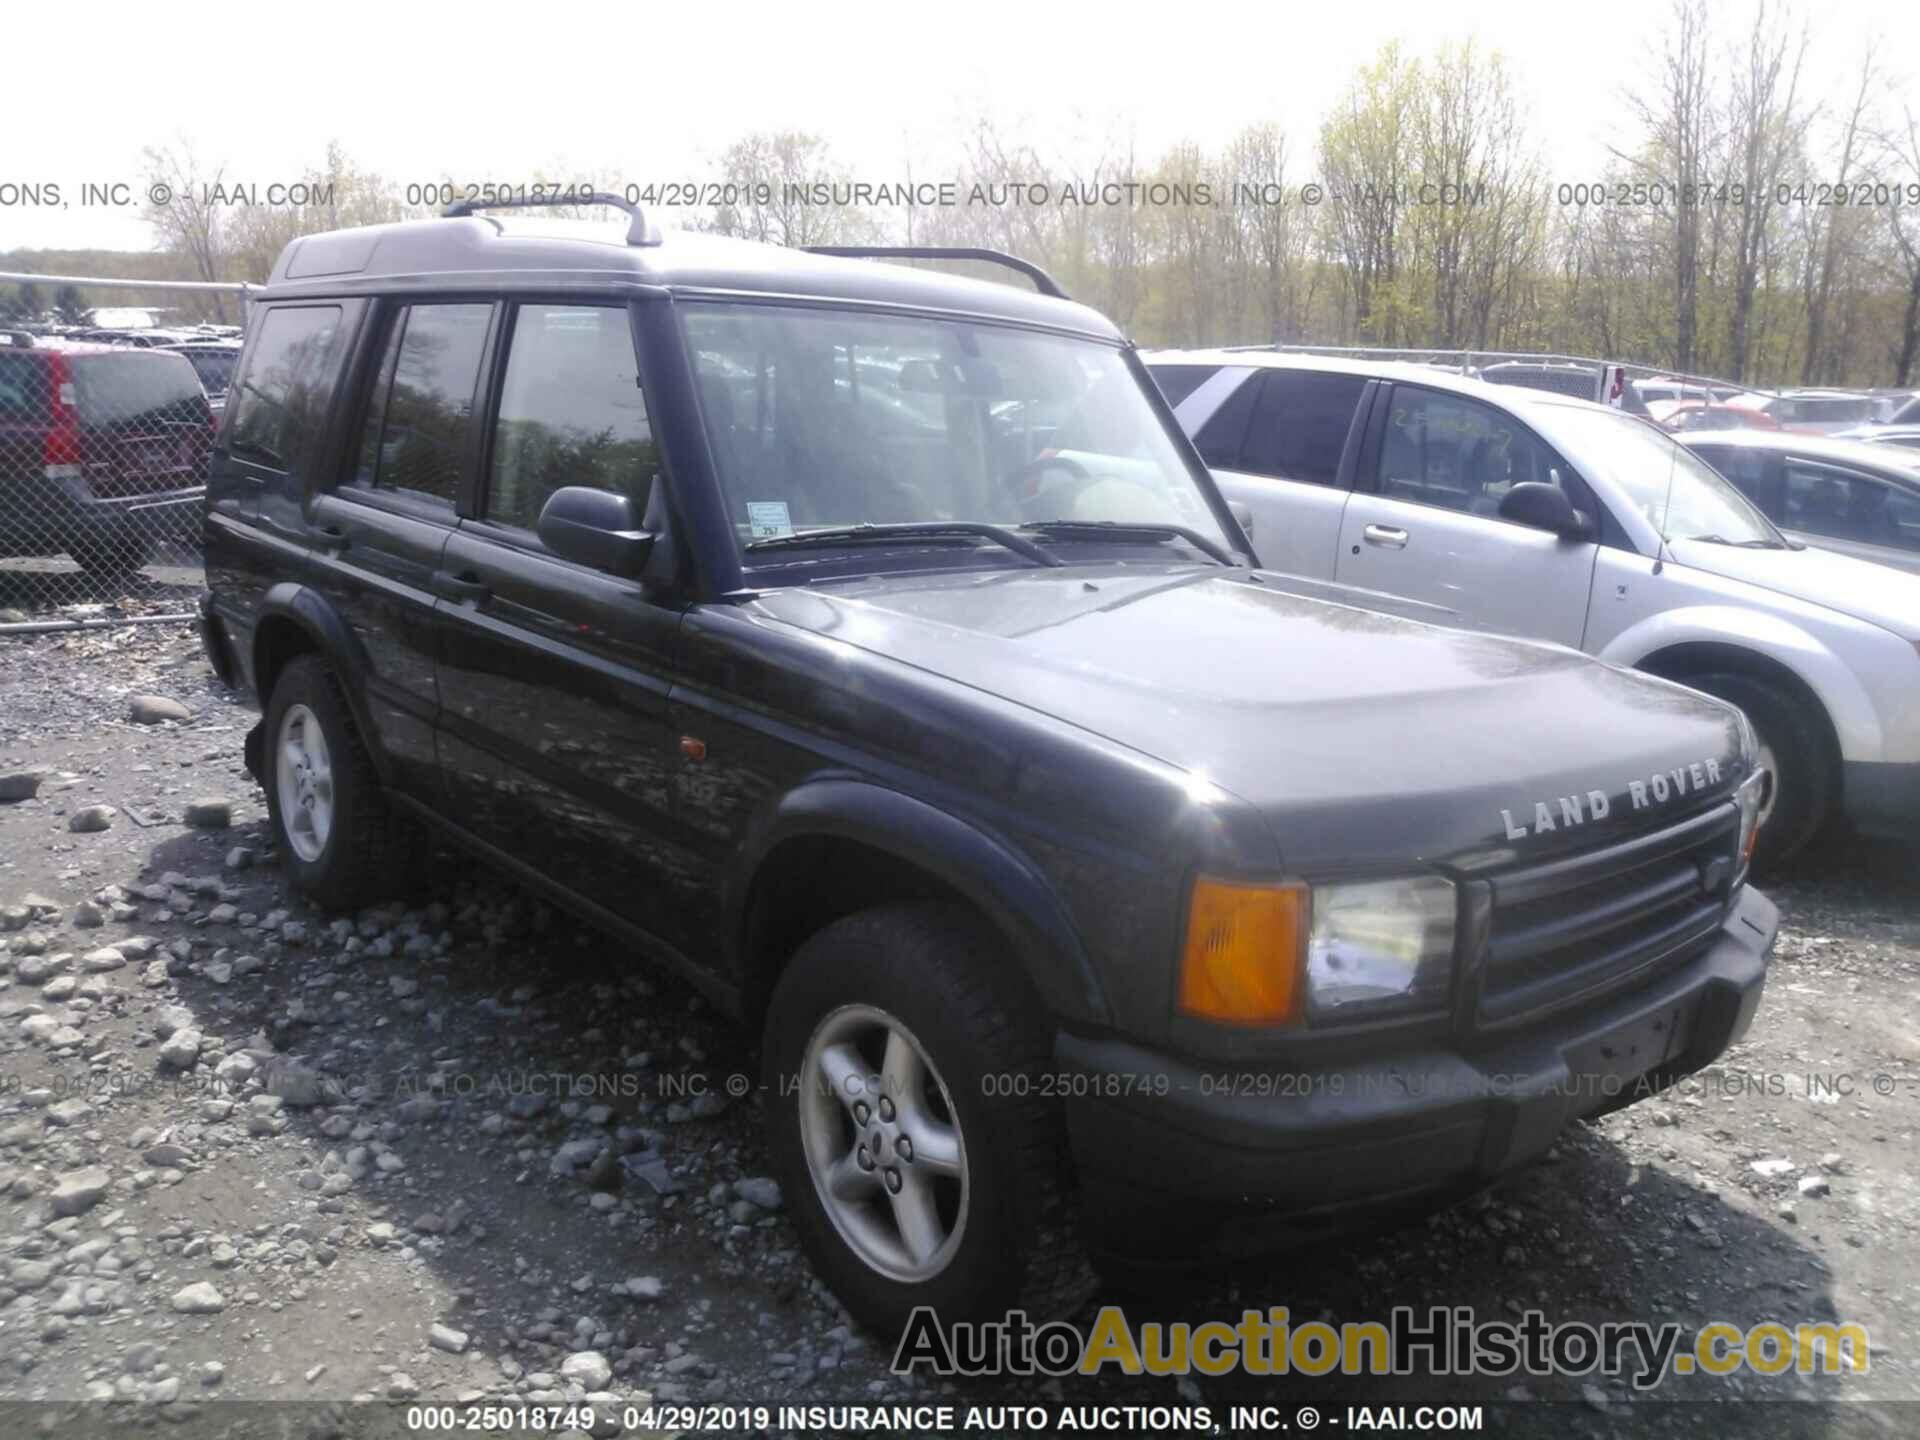 LAND ROVER DISCOVERY II, SALTK12412A743575